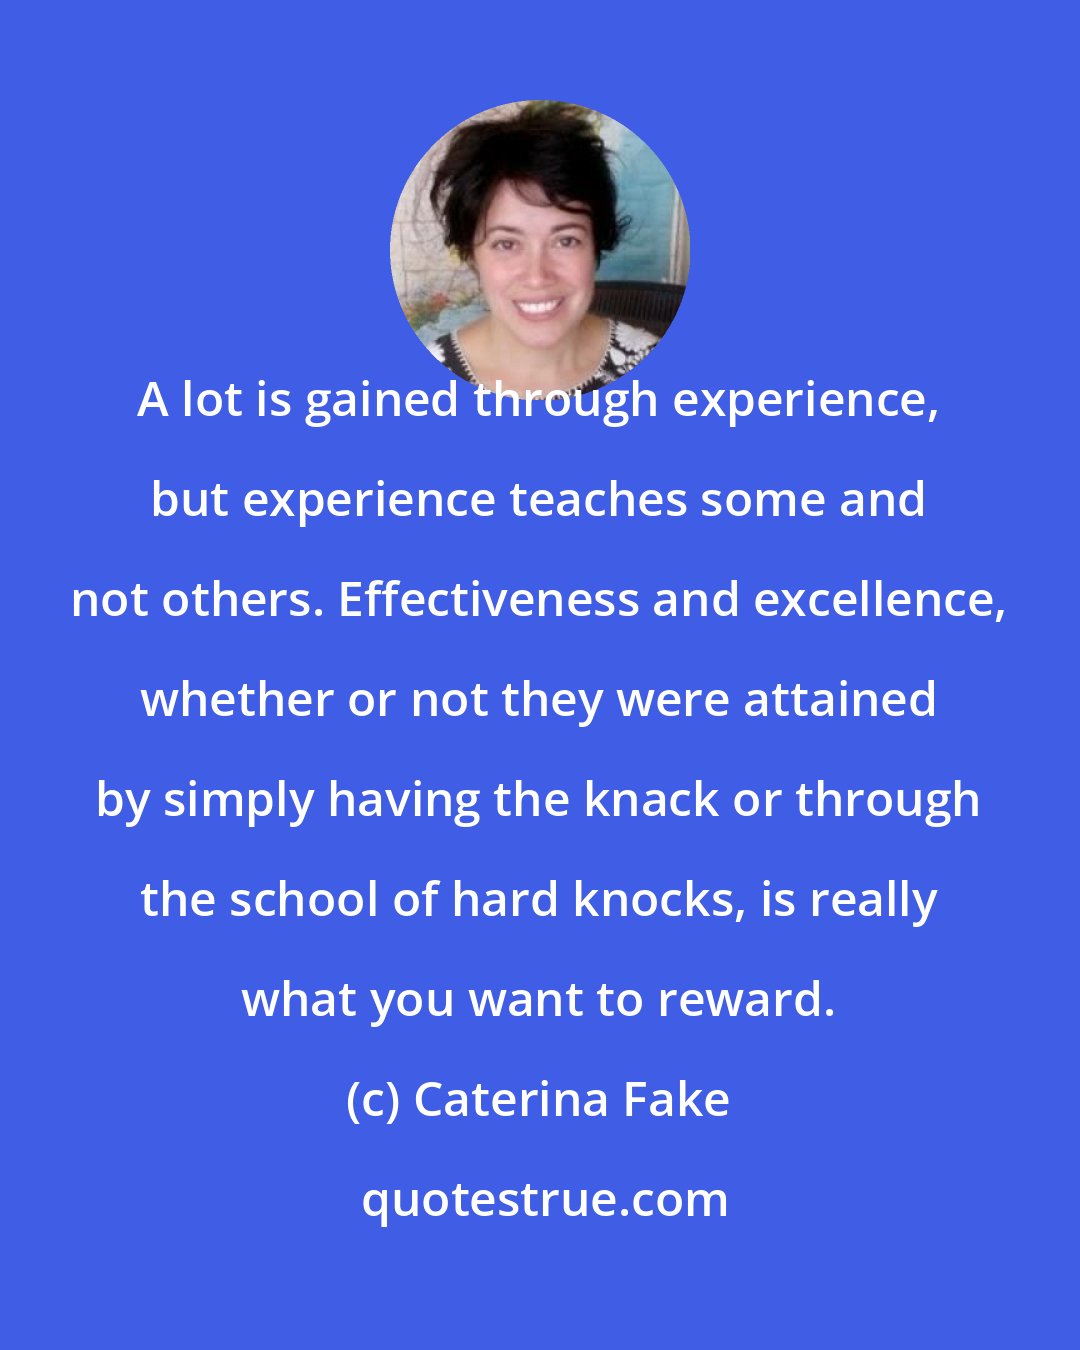 Caterina Fake: A lot is gained through experience, but experience teaches some and not others. Effectiveness and excellence, whether or not they were attained by simply having the knack or through the school of hard knocks, is really what you want to reward.